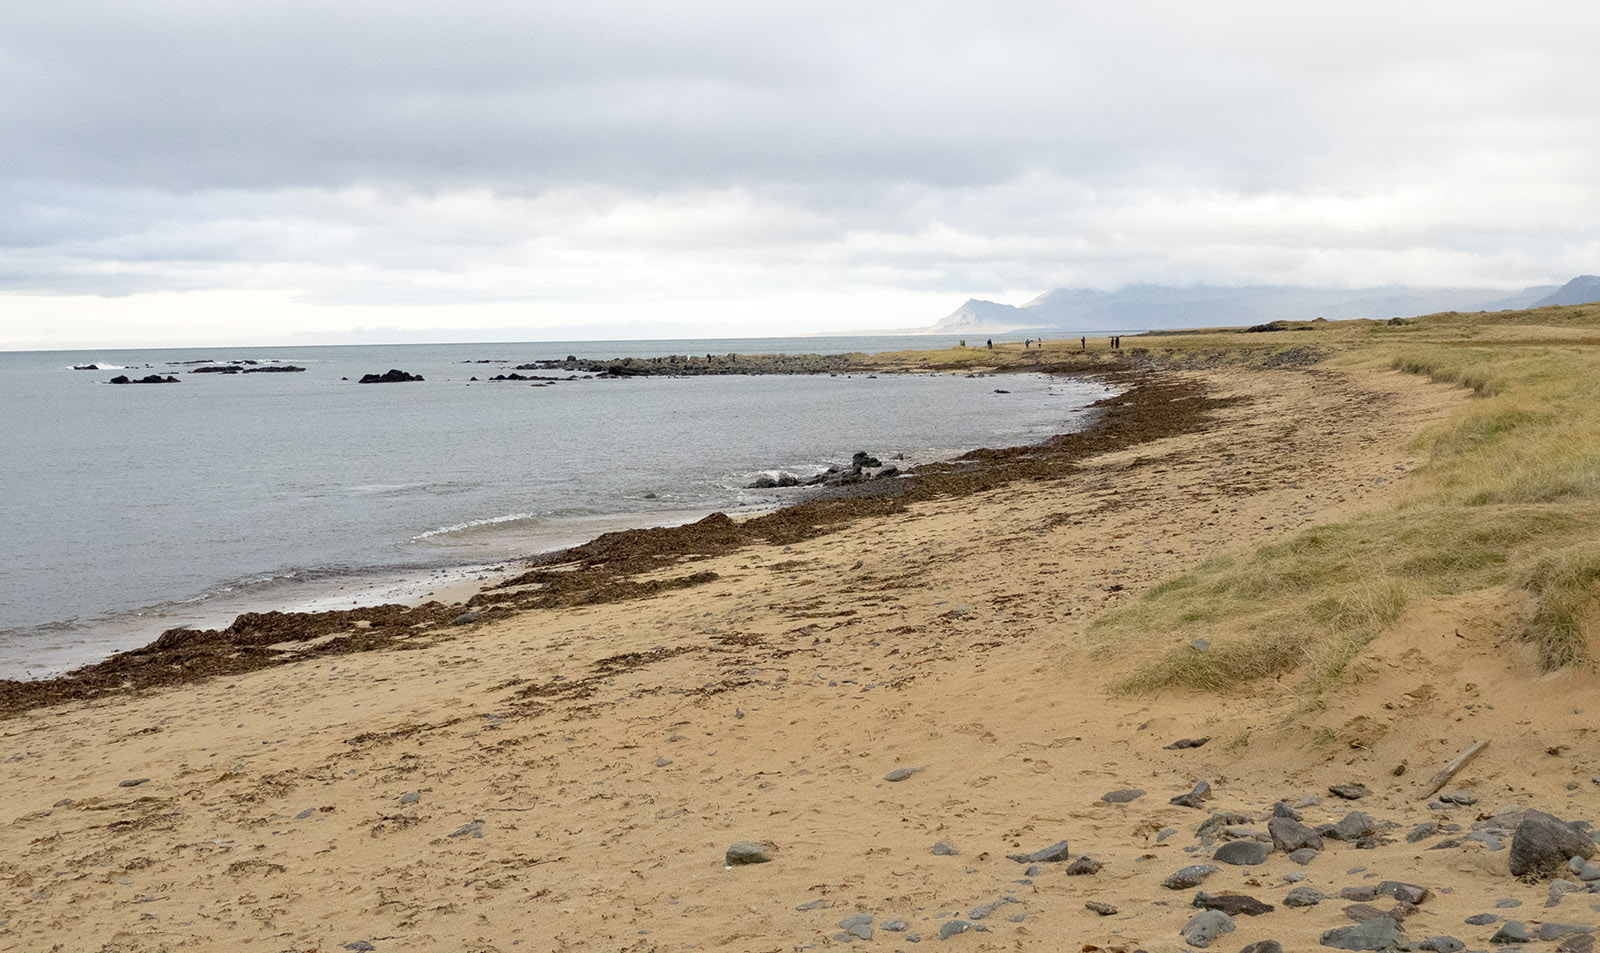 The coastline and beach at Ytri Tunga.  Lighter colored sand may be the result of higher density fragments of olivine crystals (magnesium sulfate) and plagioclase from a nearby volcano that erupted (5,000-8,000 years ago) that was rich in these minerals (Búðaklettur.)  Erosion and water flow could account for its location on this beach.  Most of the beach sand we observed on our Iceland trip was black due to the high basalt content (rich in iron and magnesium).